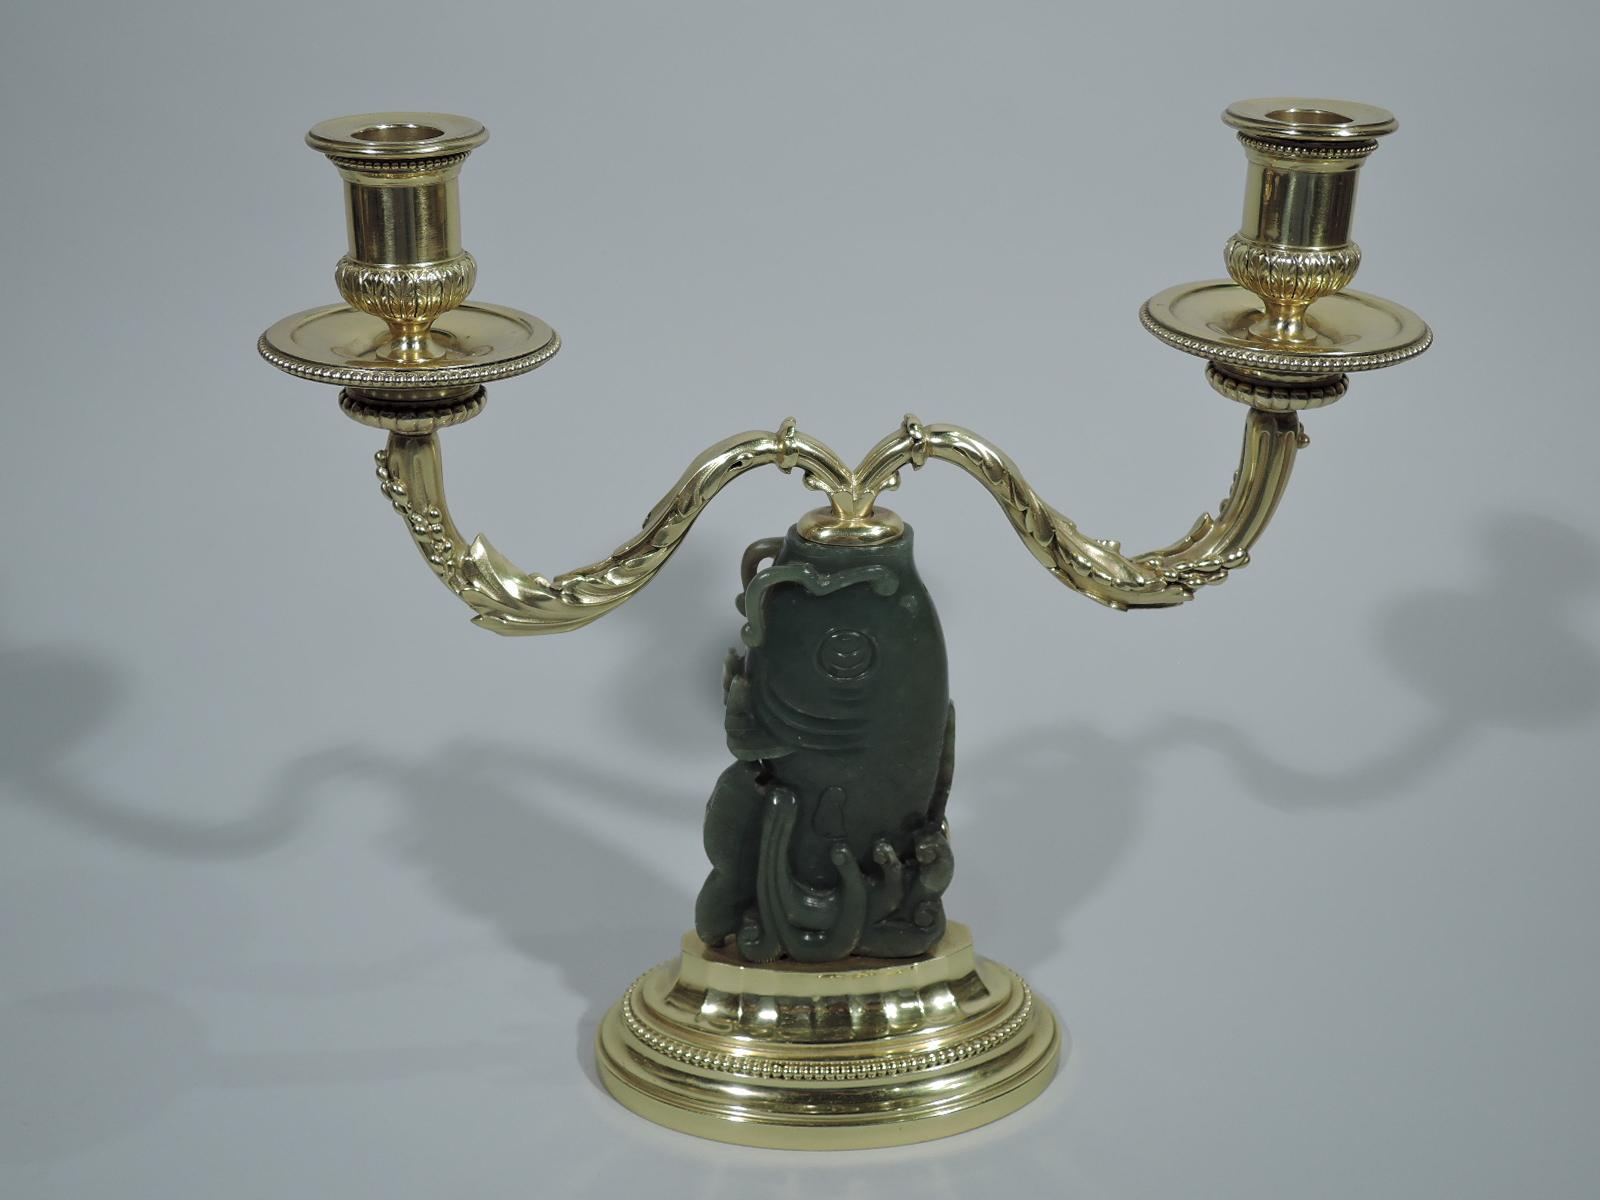 Pair of gilt 950 silver 2-light candelabra with carved jade shaft. Made by Cartier in France, circa 1930. Each: Carp shaft in carved jade mounted to stepped and beaded oval base. Set in gaping fish mouth are two leaf-wrapped arms each terminating in